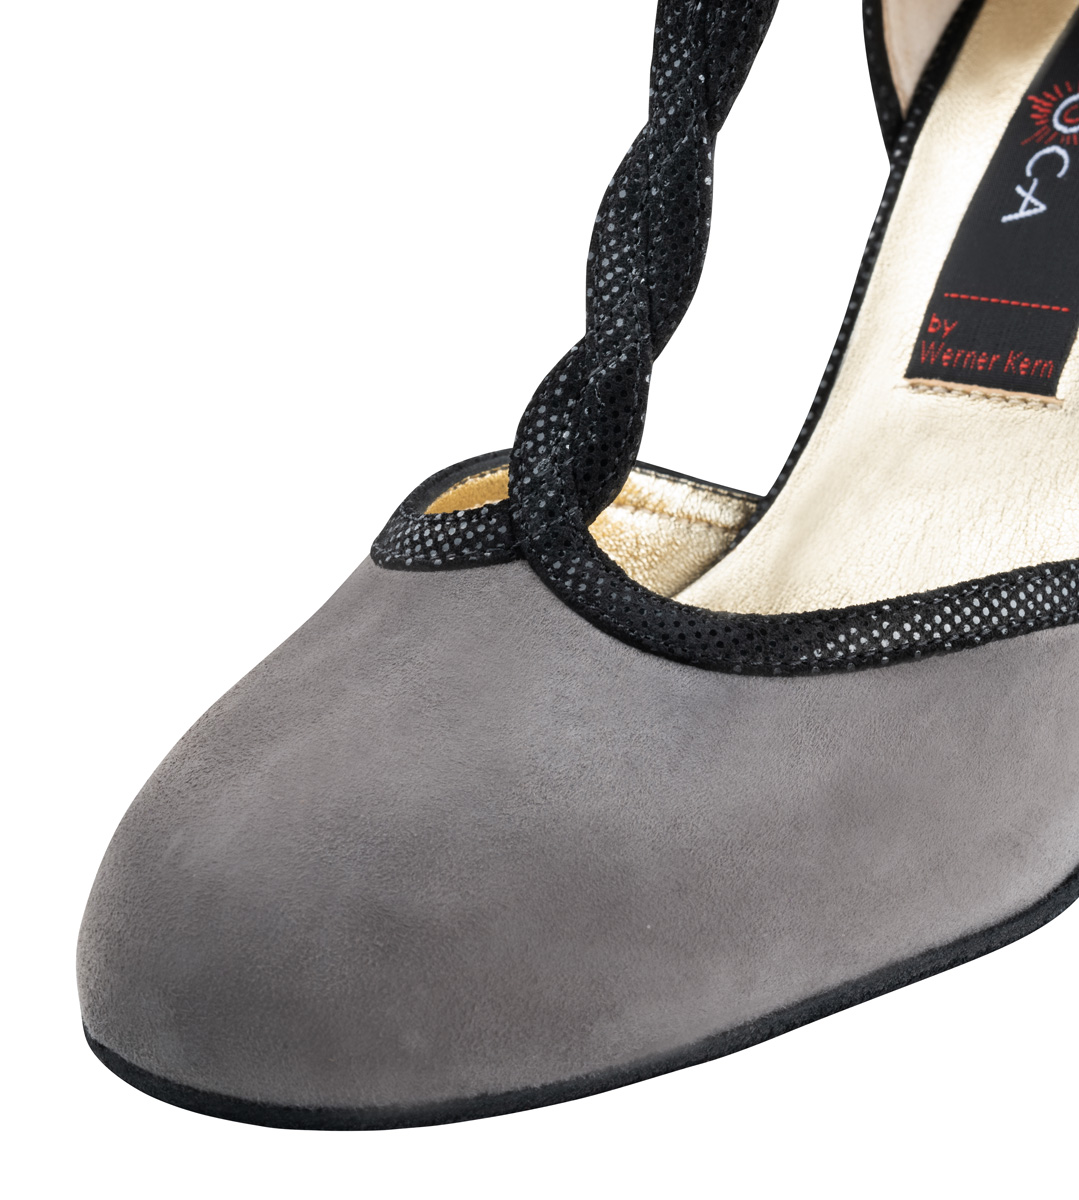 Detail view from the front of the Nueva Epoca ladies dance shoe in grey